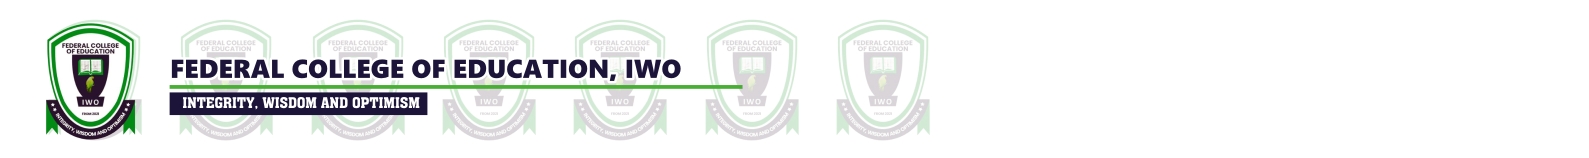 FEDERAL COLLEGE OF EDUCATION IWO